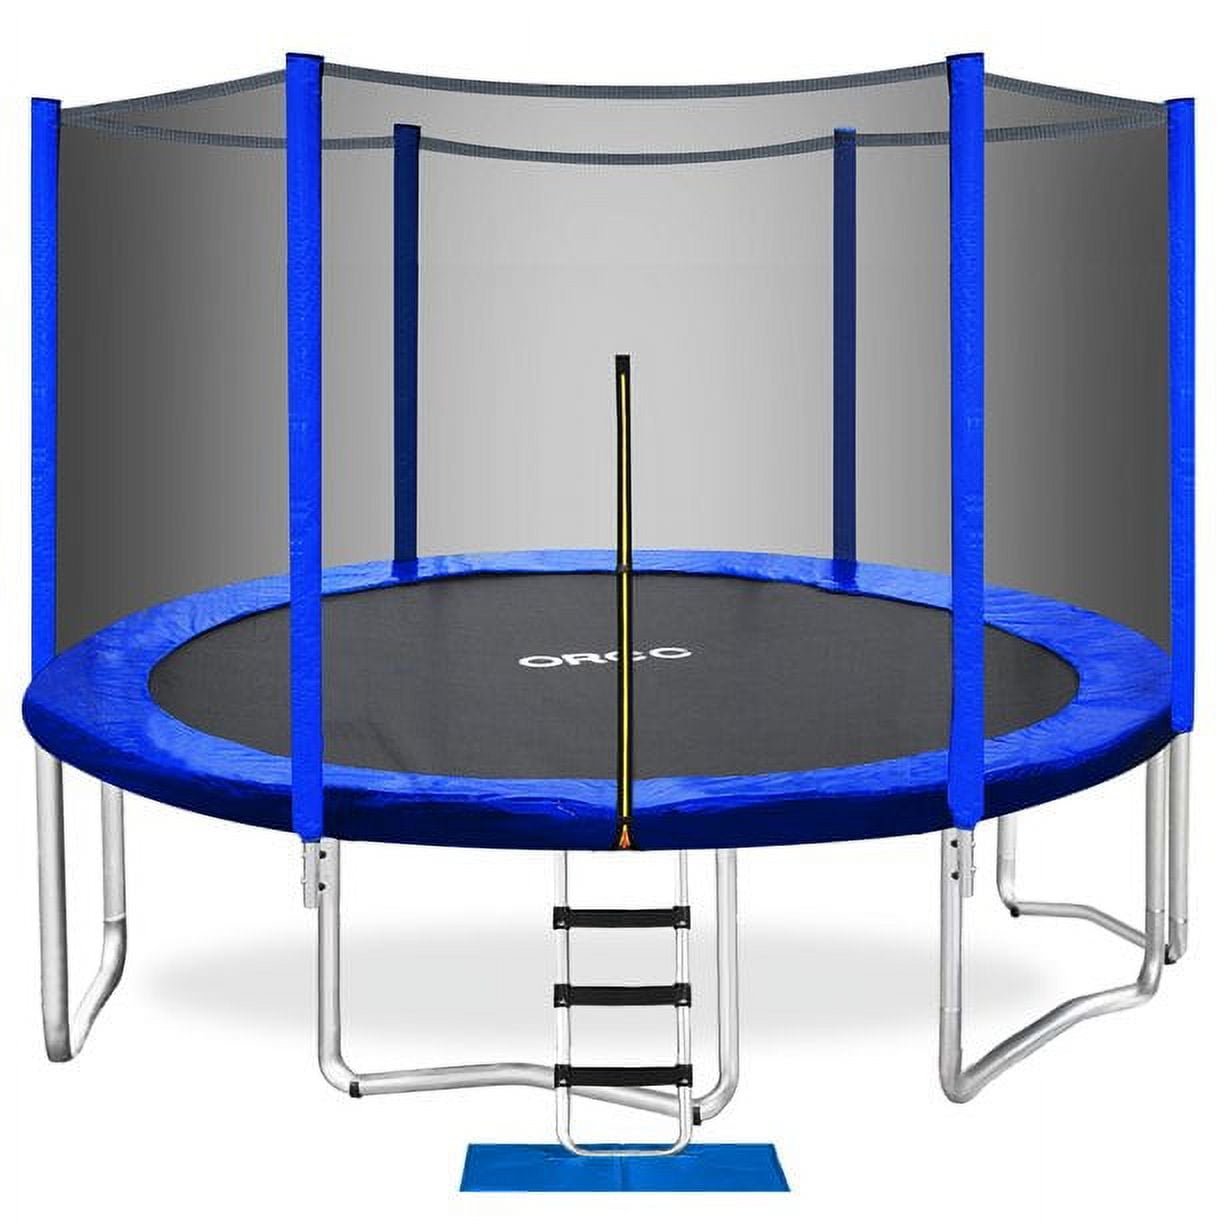 Spring vs. Bungee Mini Trampoline - Pros & Cons - Fit for motherhood